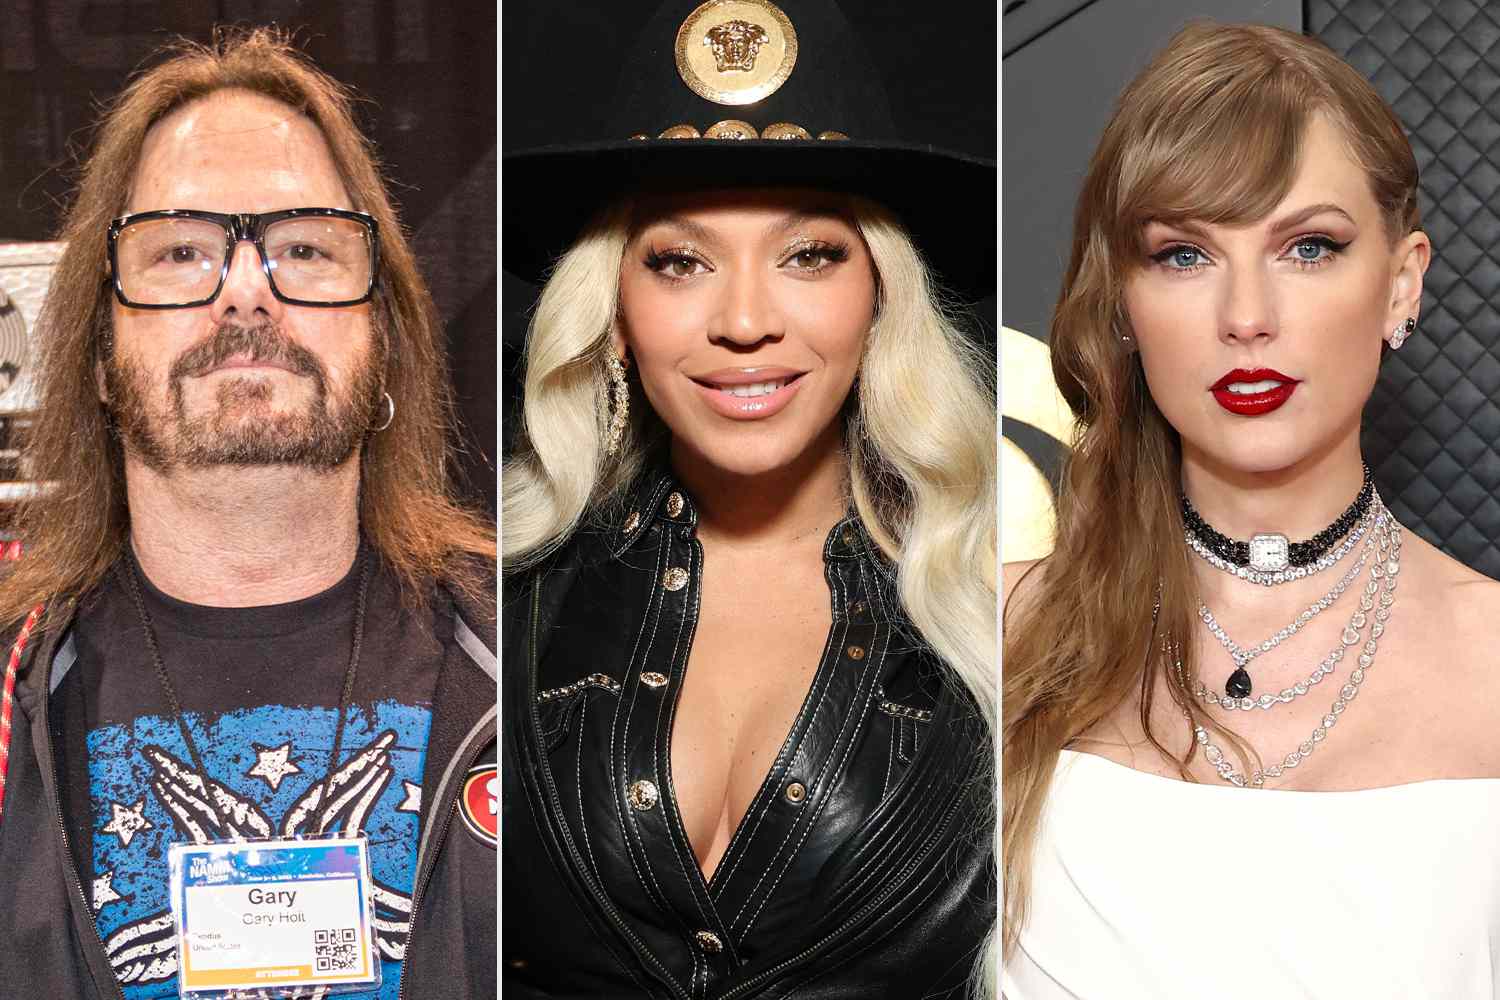 Slayer's Gary Holt Asks 'Why All the Hate?' About Taylor Swift — Then Criticizes Beyoncé as 'Most Overrated Talent'